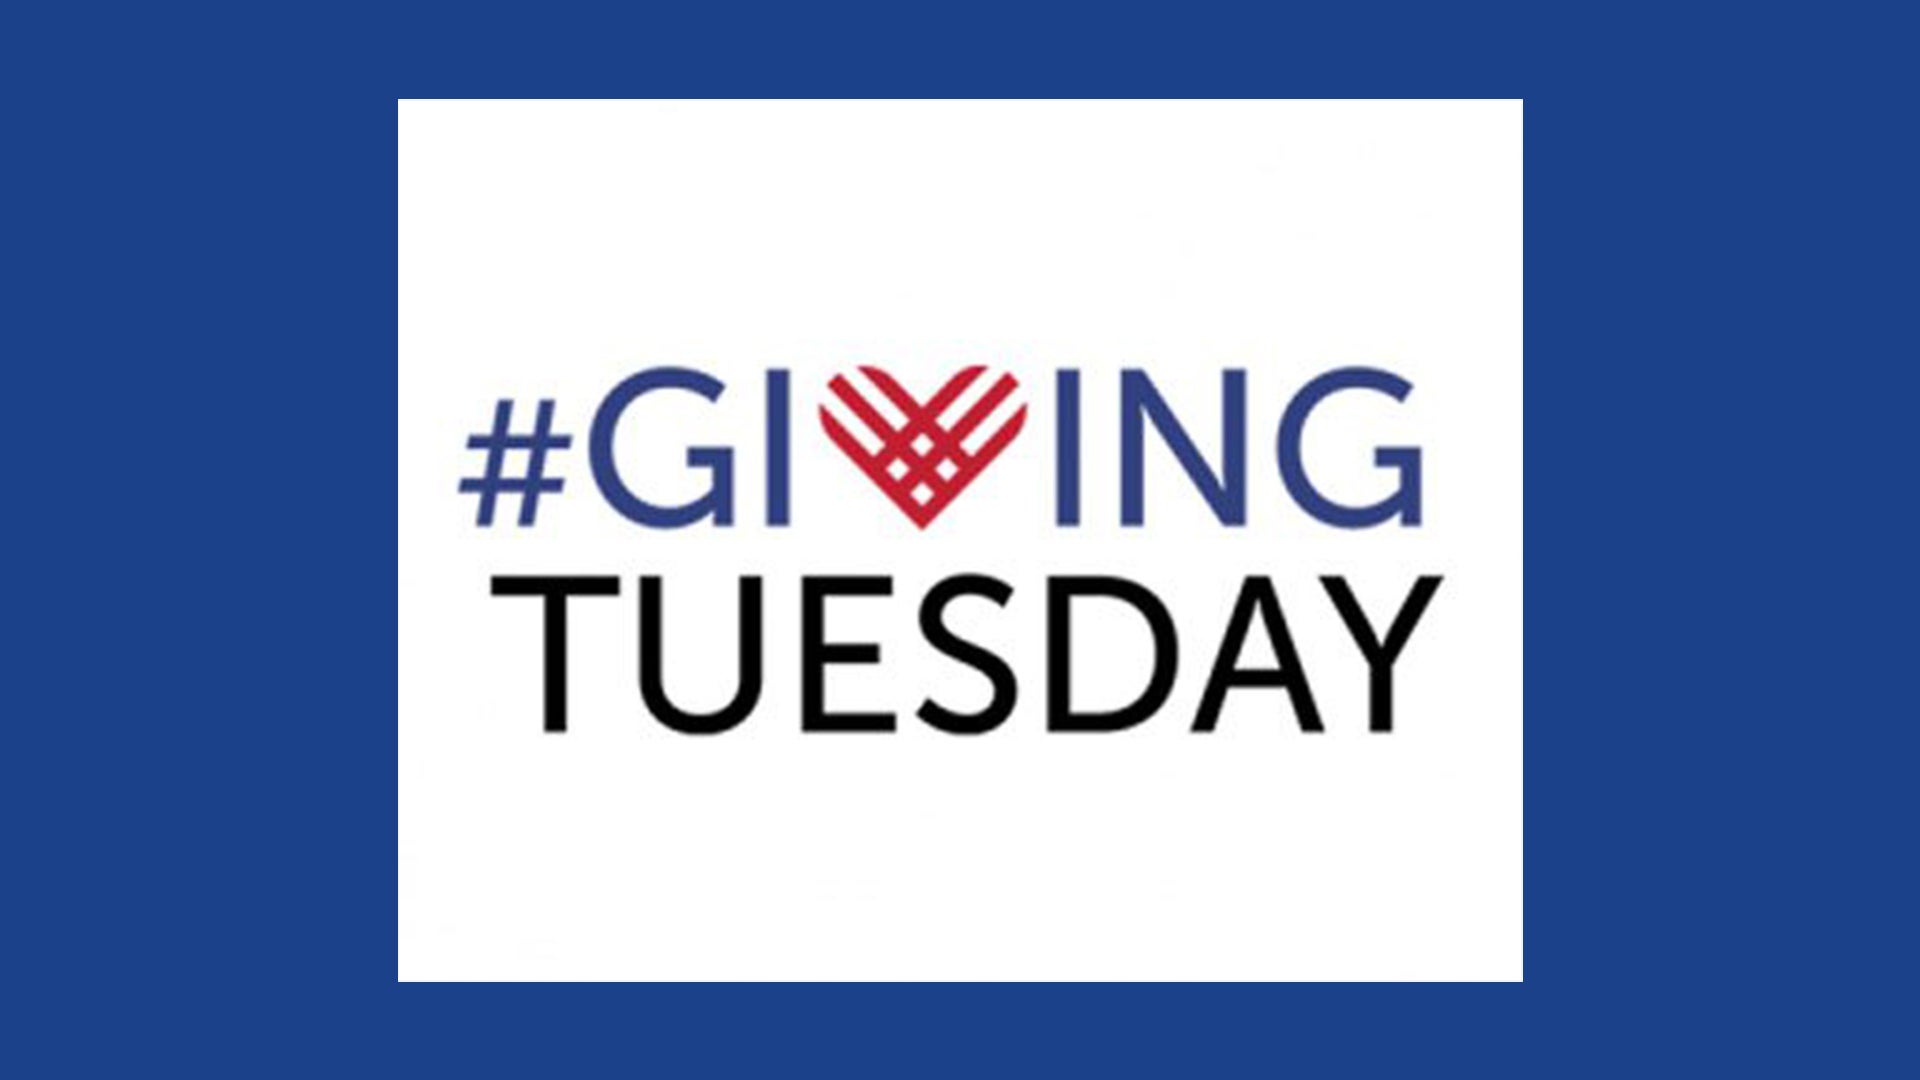 For Giving Tuesday November 30, 2021, please consider making a gift to RUSMP.